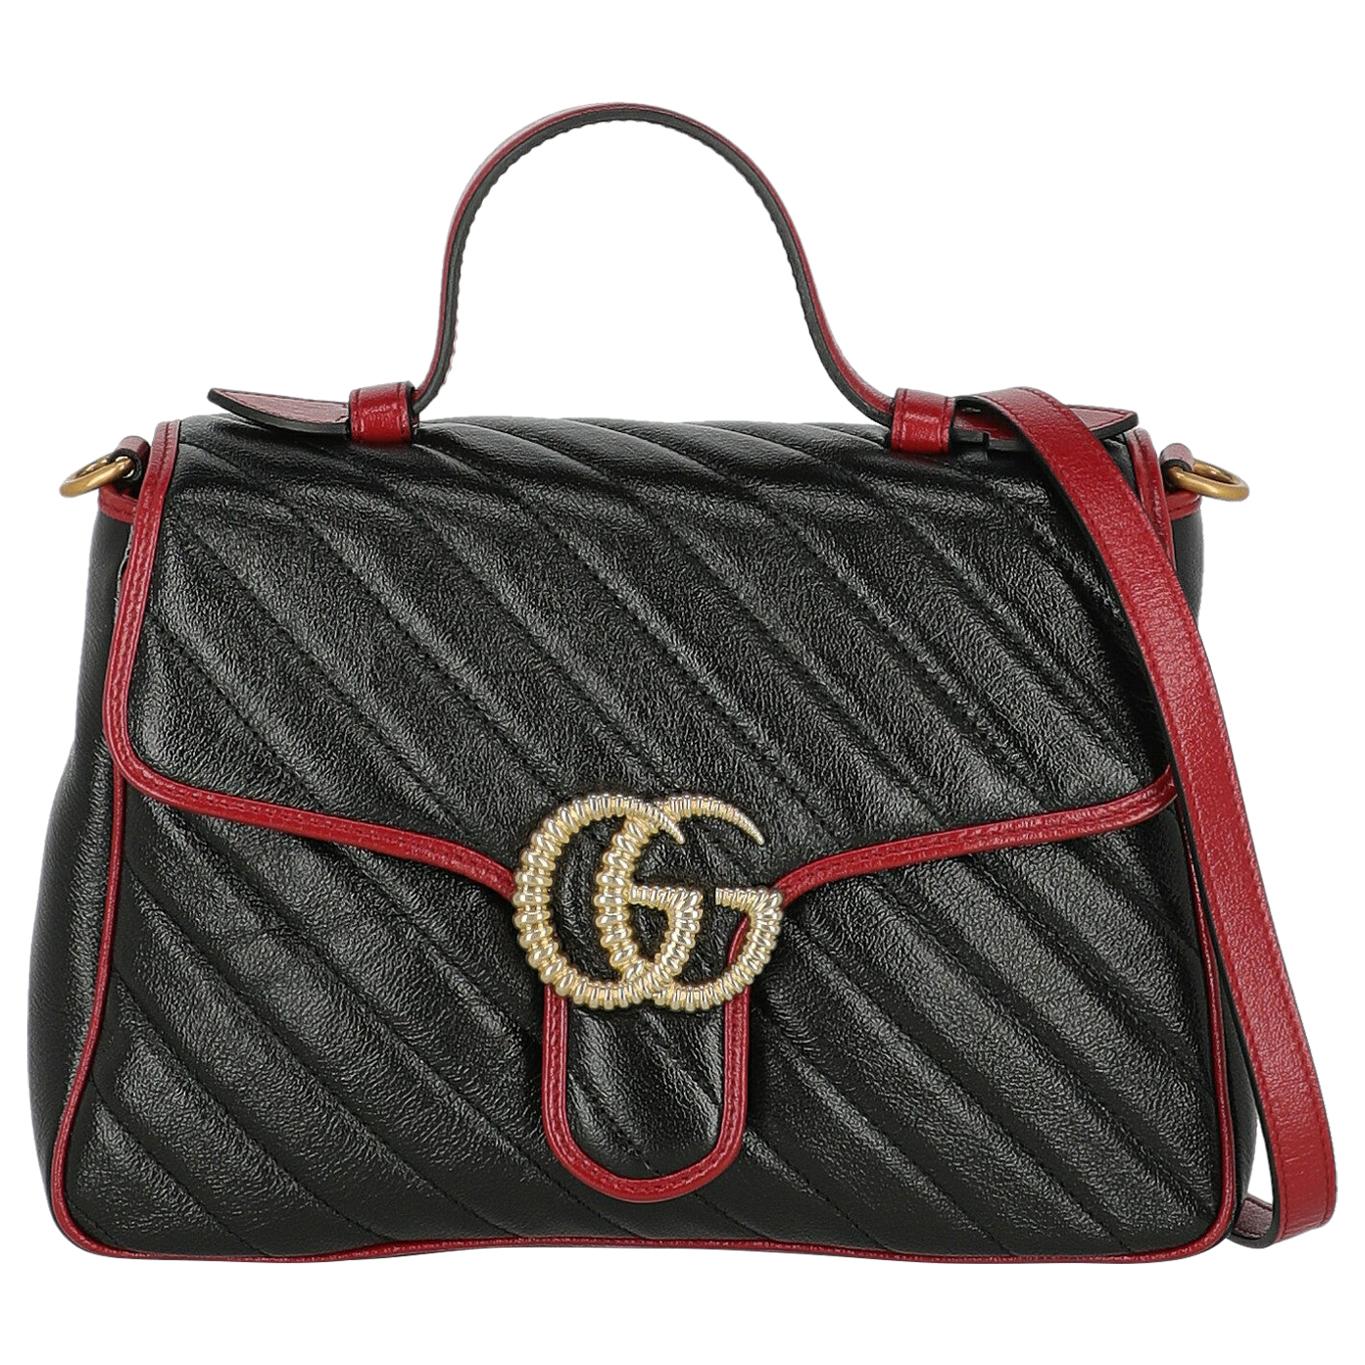 Gucci Women's Crossbody Bag  Marmont Black/Red Leather For Sale